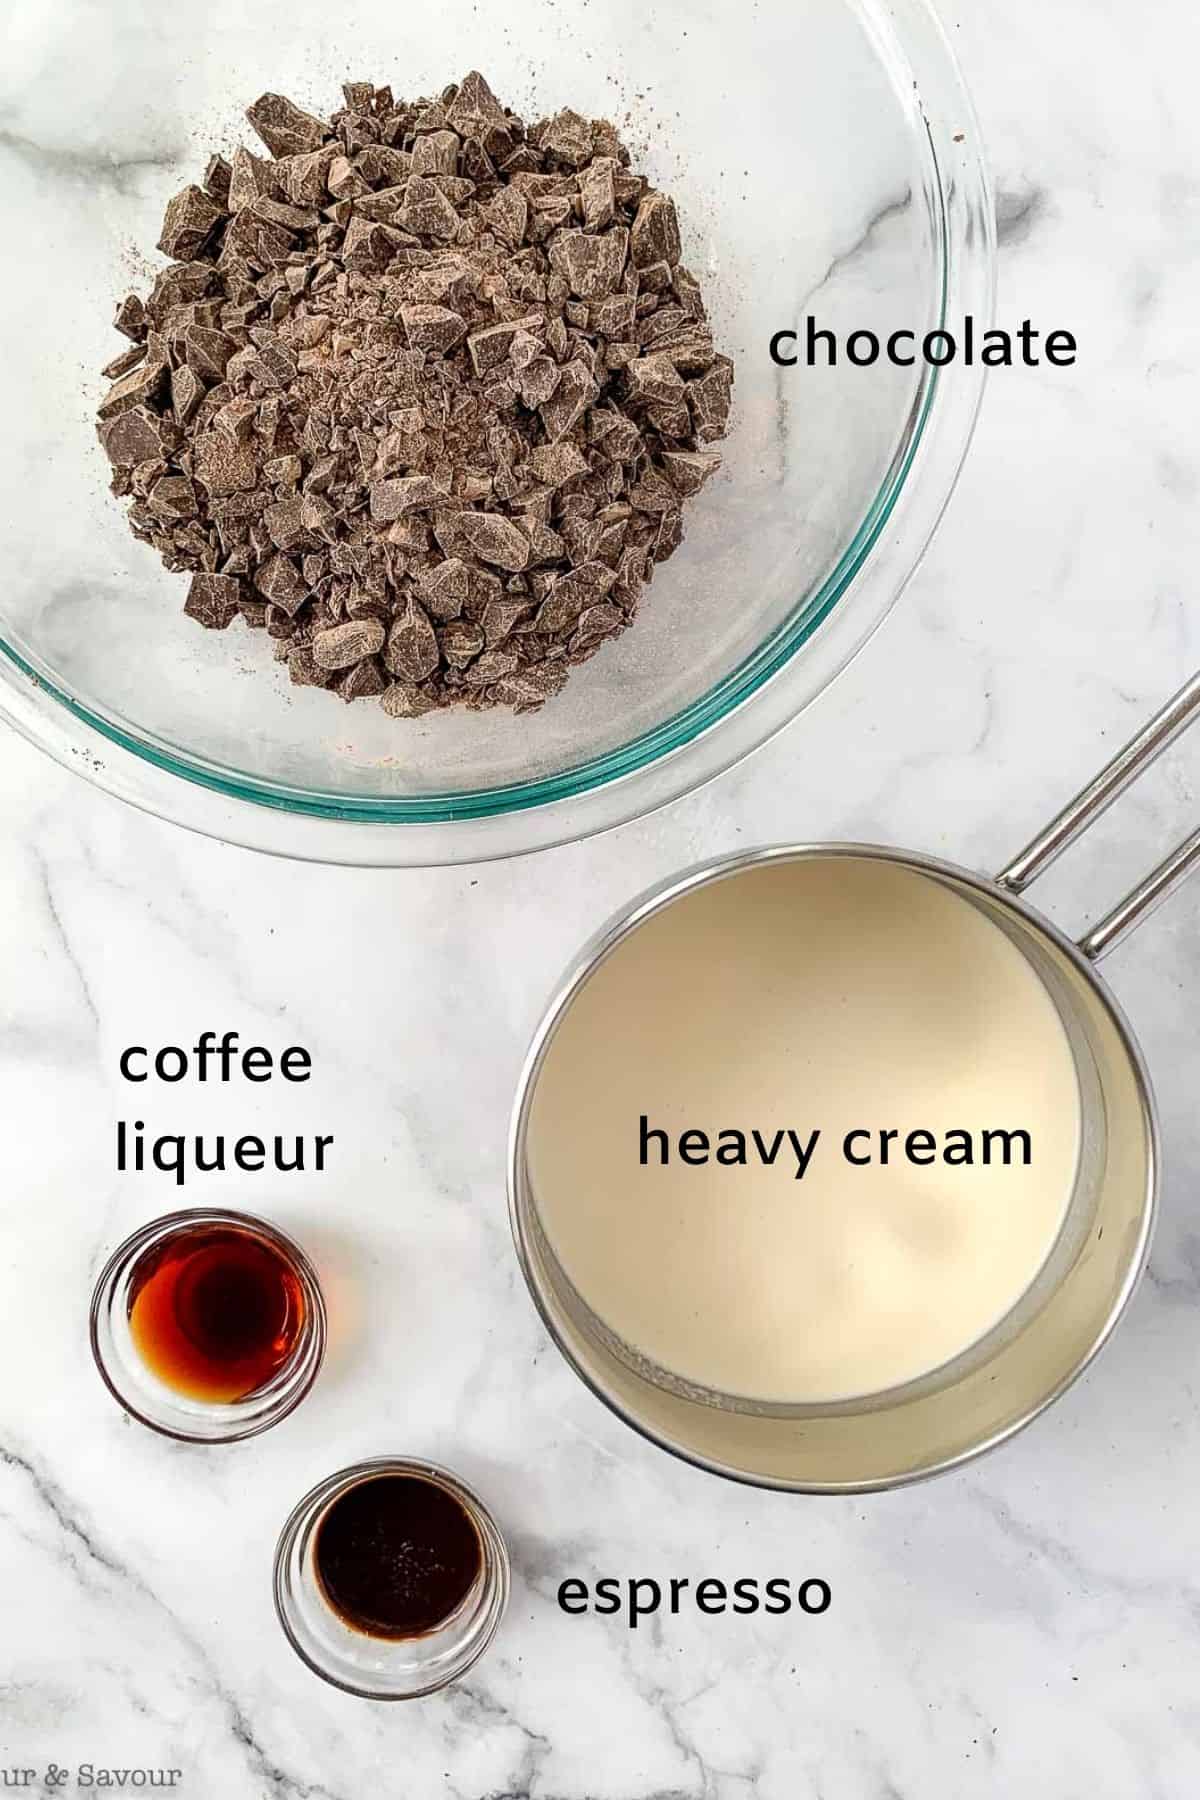 ingredients for chocolate filling for chocolate ganache tart